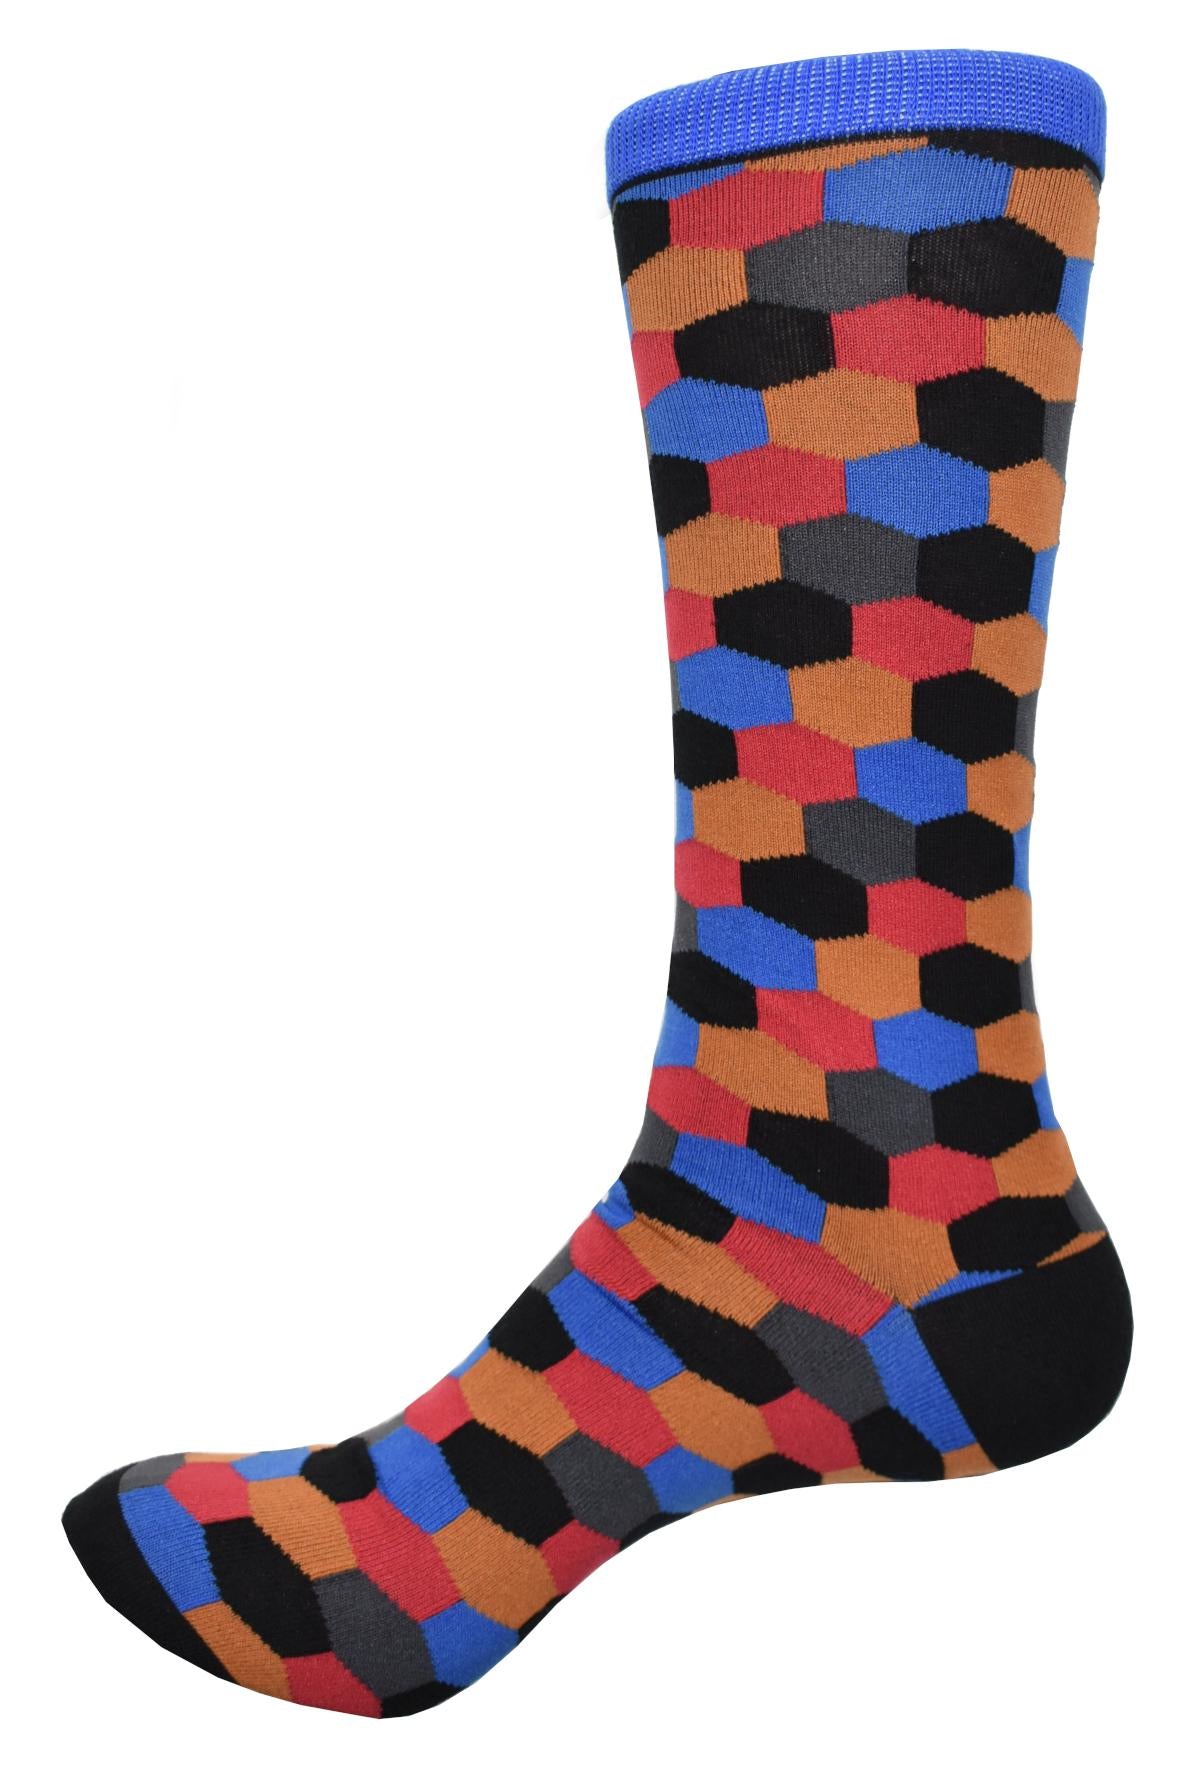 Experience comfort and style with ZJ8050 Multi Seta Geometric socks! These luxurious mercerized cotton socks are perfect for everyday wear, featuring vibrant shades that will add a touch of classic elegance to any outfit. One size fits sizes 9-12, while the mid calf height keeps you looking smart all day.